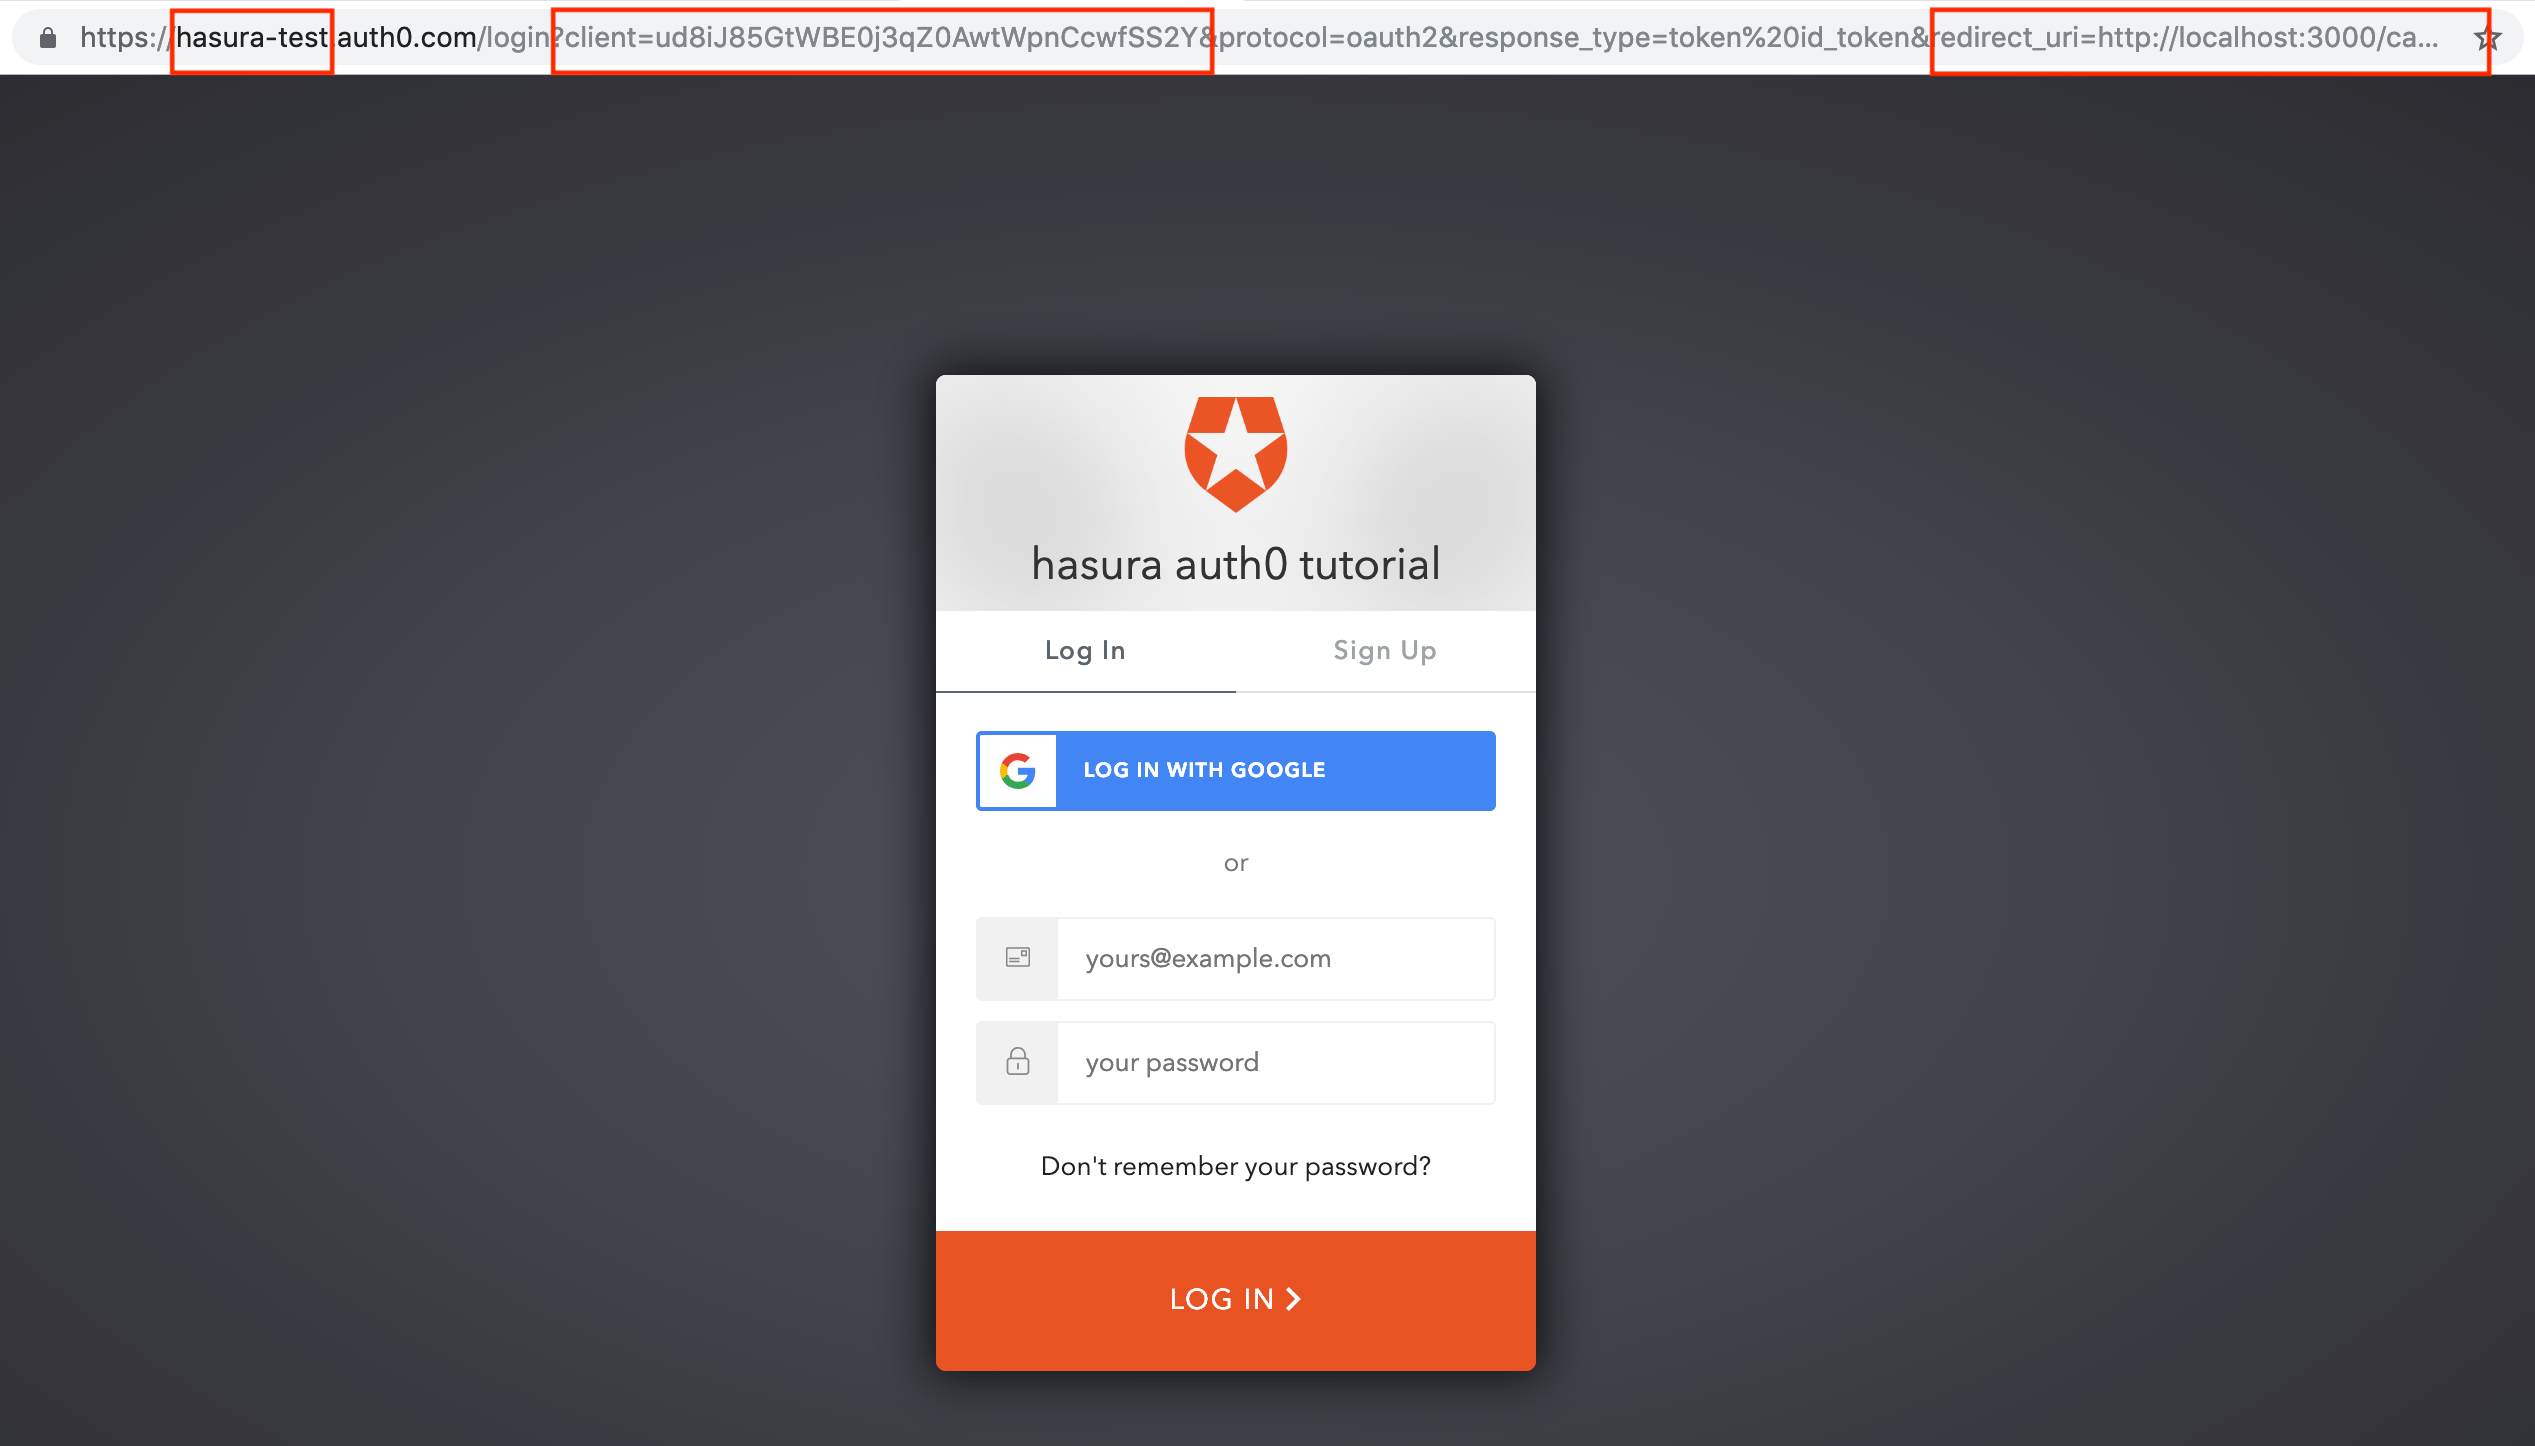 Auth0 login page